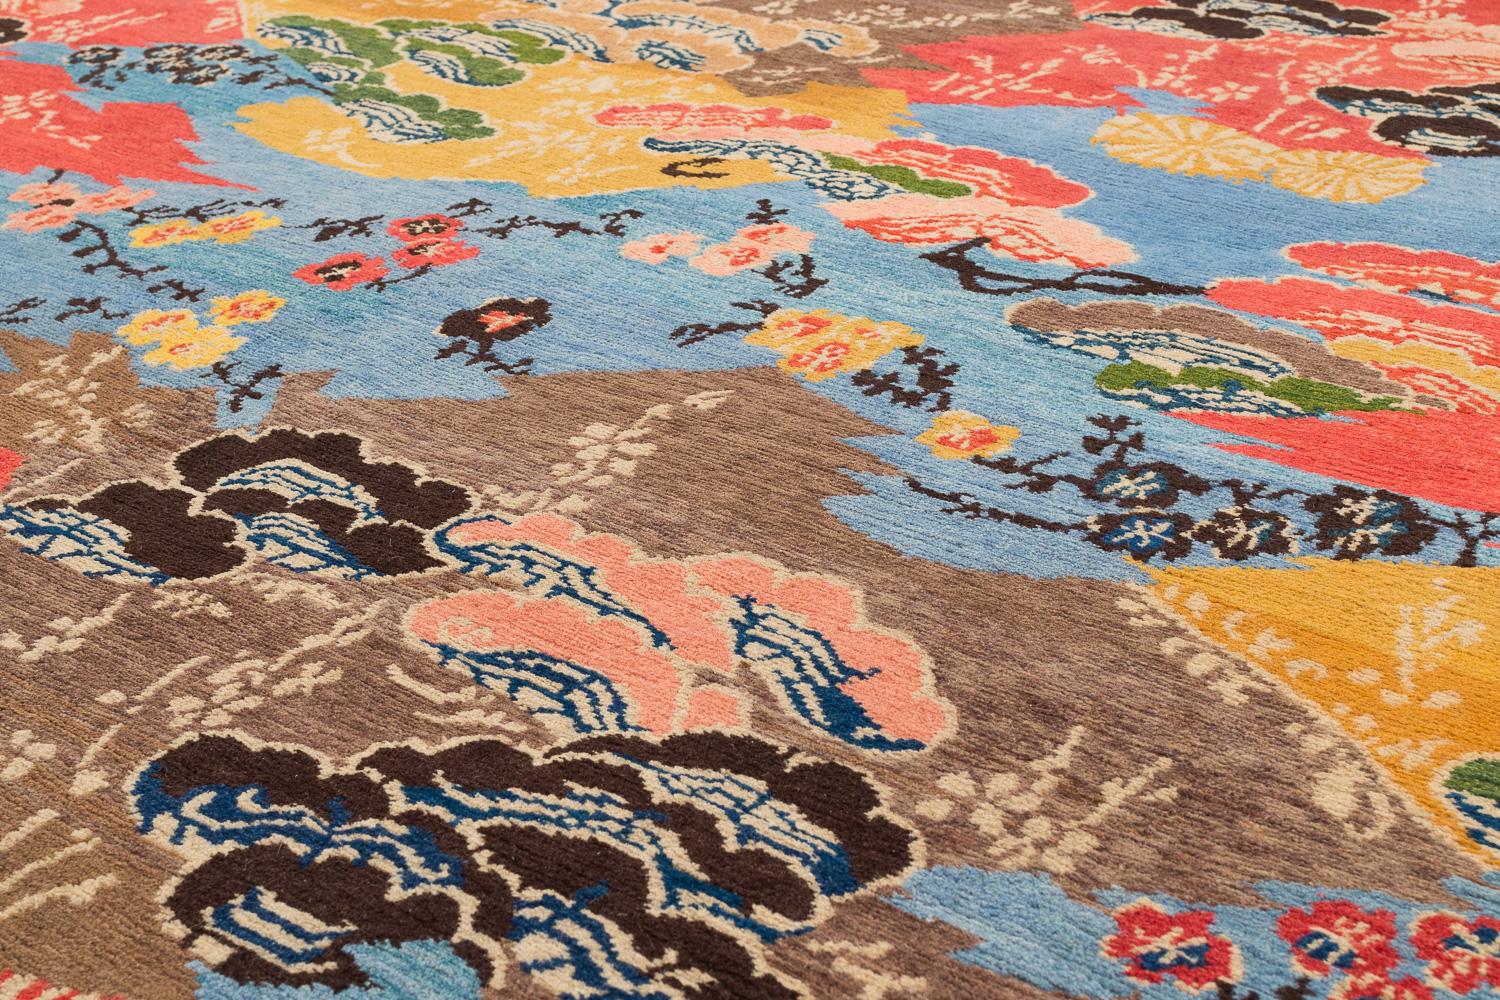 Delicate flowers and Eastern motifs are scattered throughout Mountain Blossom's vibrant composition. The field of brilliant blue sets off the multicolored designs in this all wool carpet. Original design by Joseph Carini. Measures: 9’ x 12’.

This